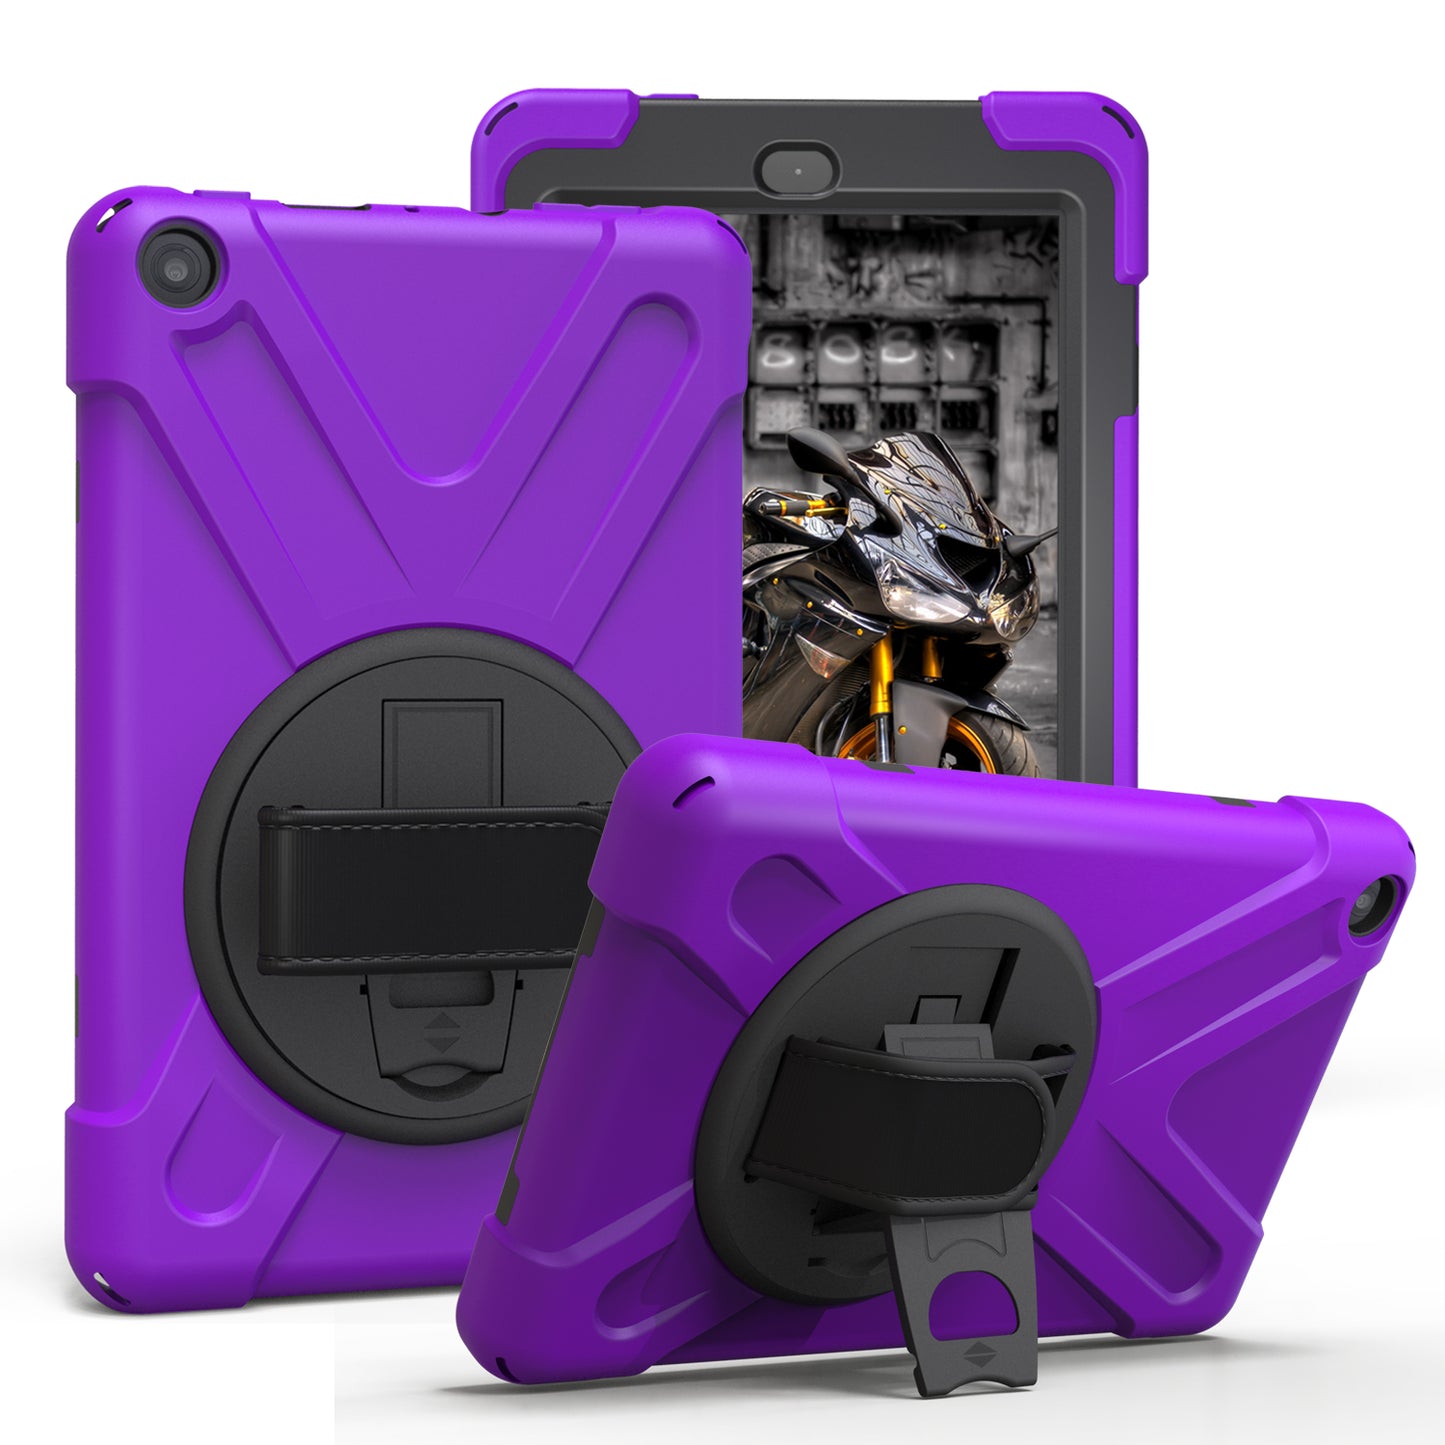 Pirate King Amazon Kindle Fire 8 (2017) Case 360 Rotating Stand Holder Shoulder Strap